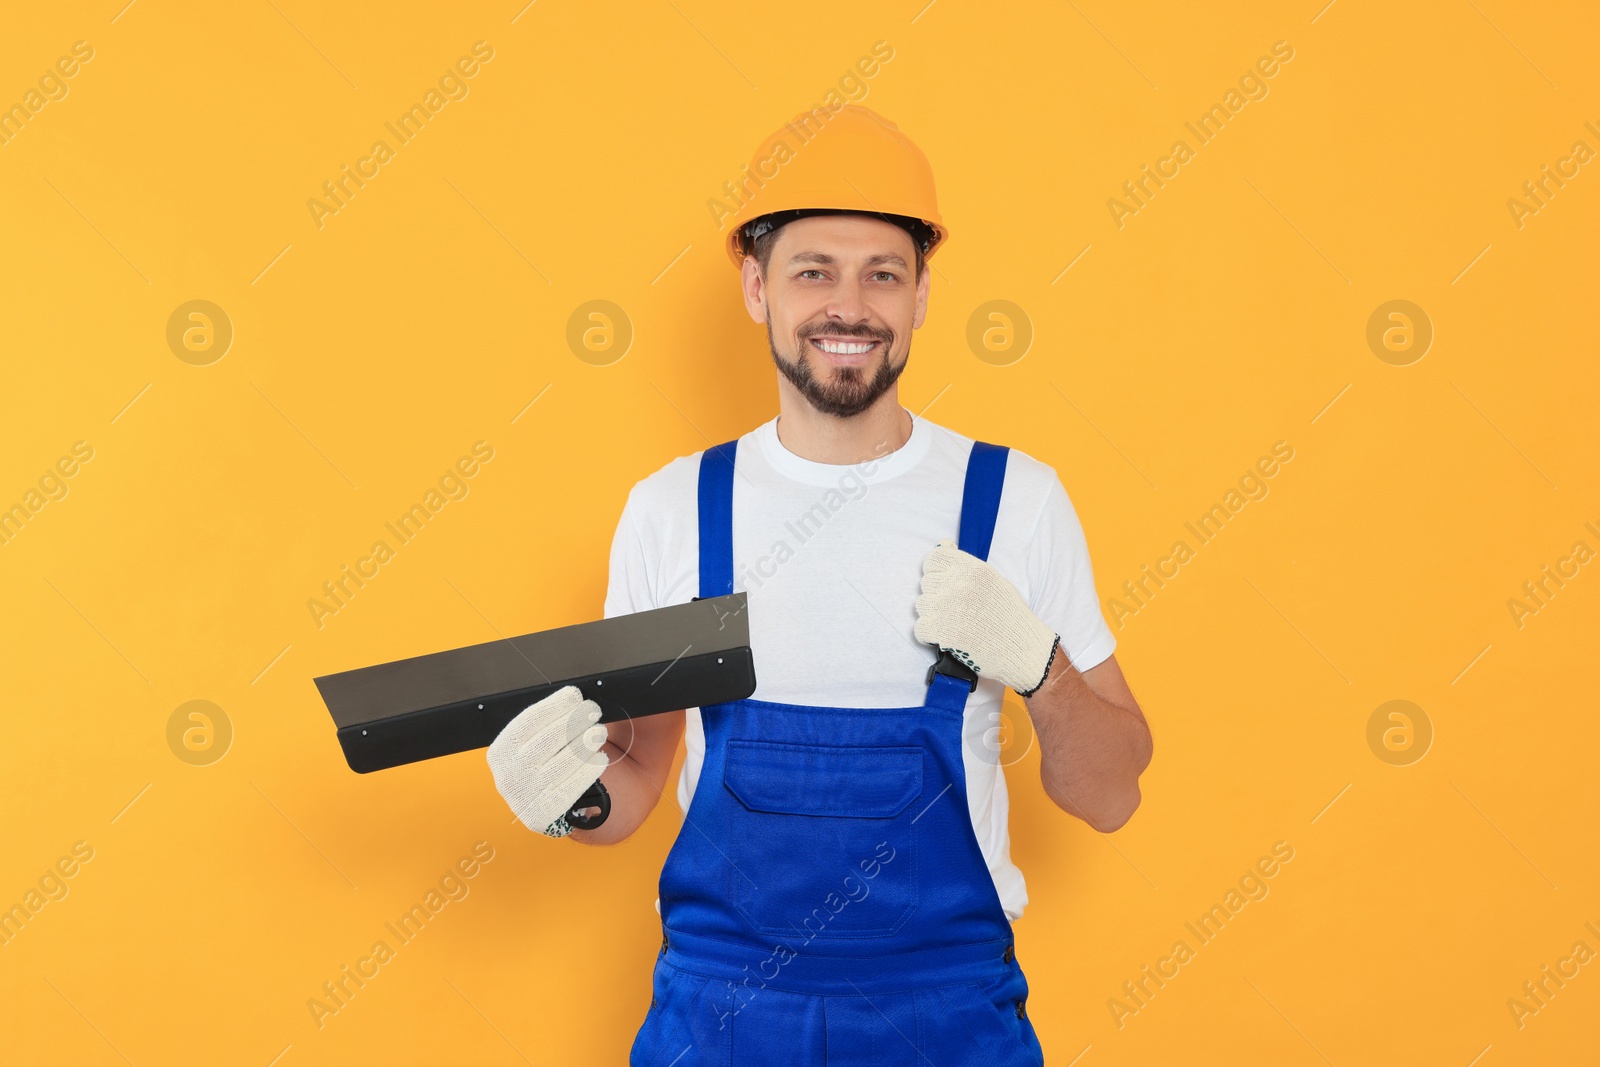 Photo of Professional worker with putty knife in hard hat on orange background